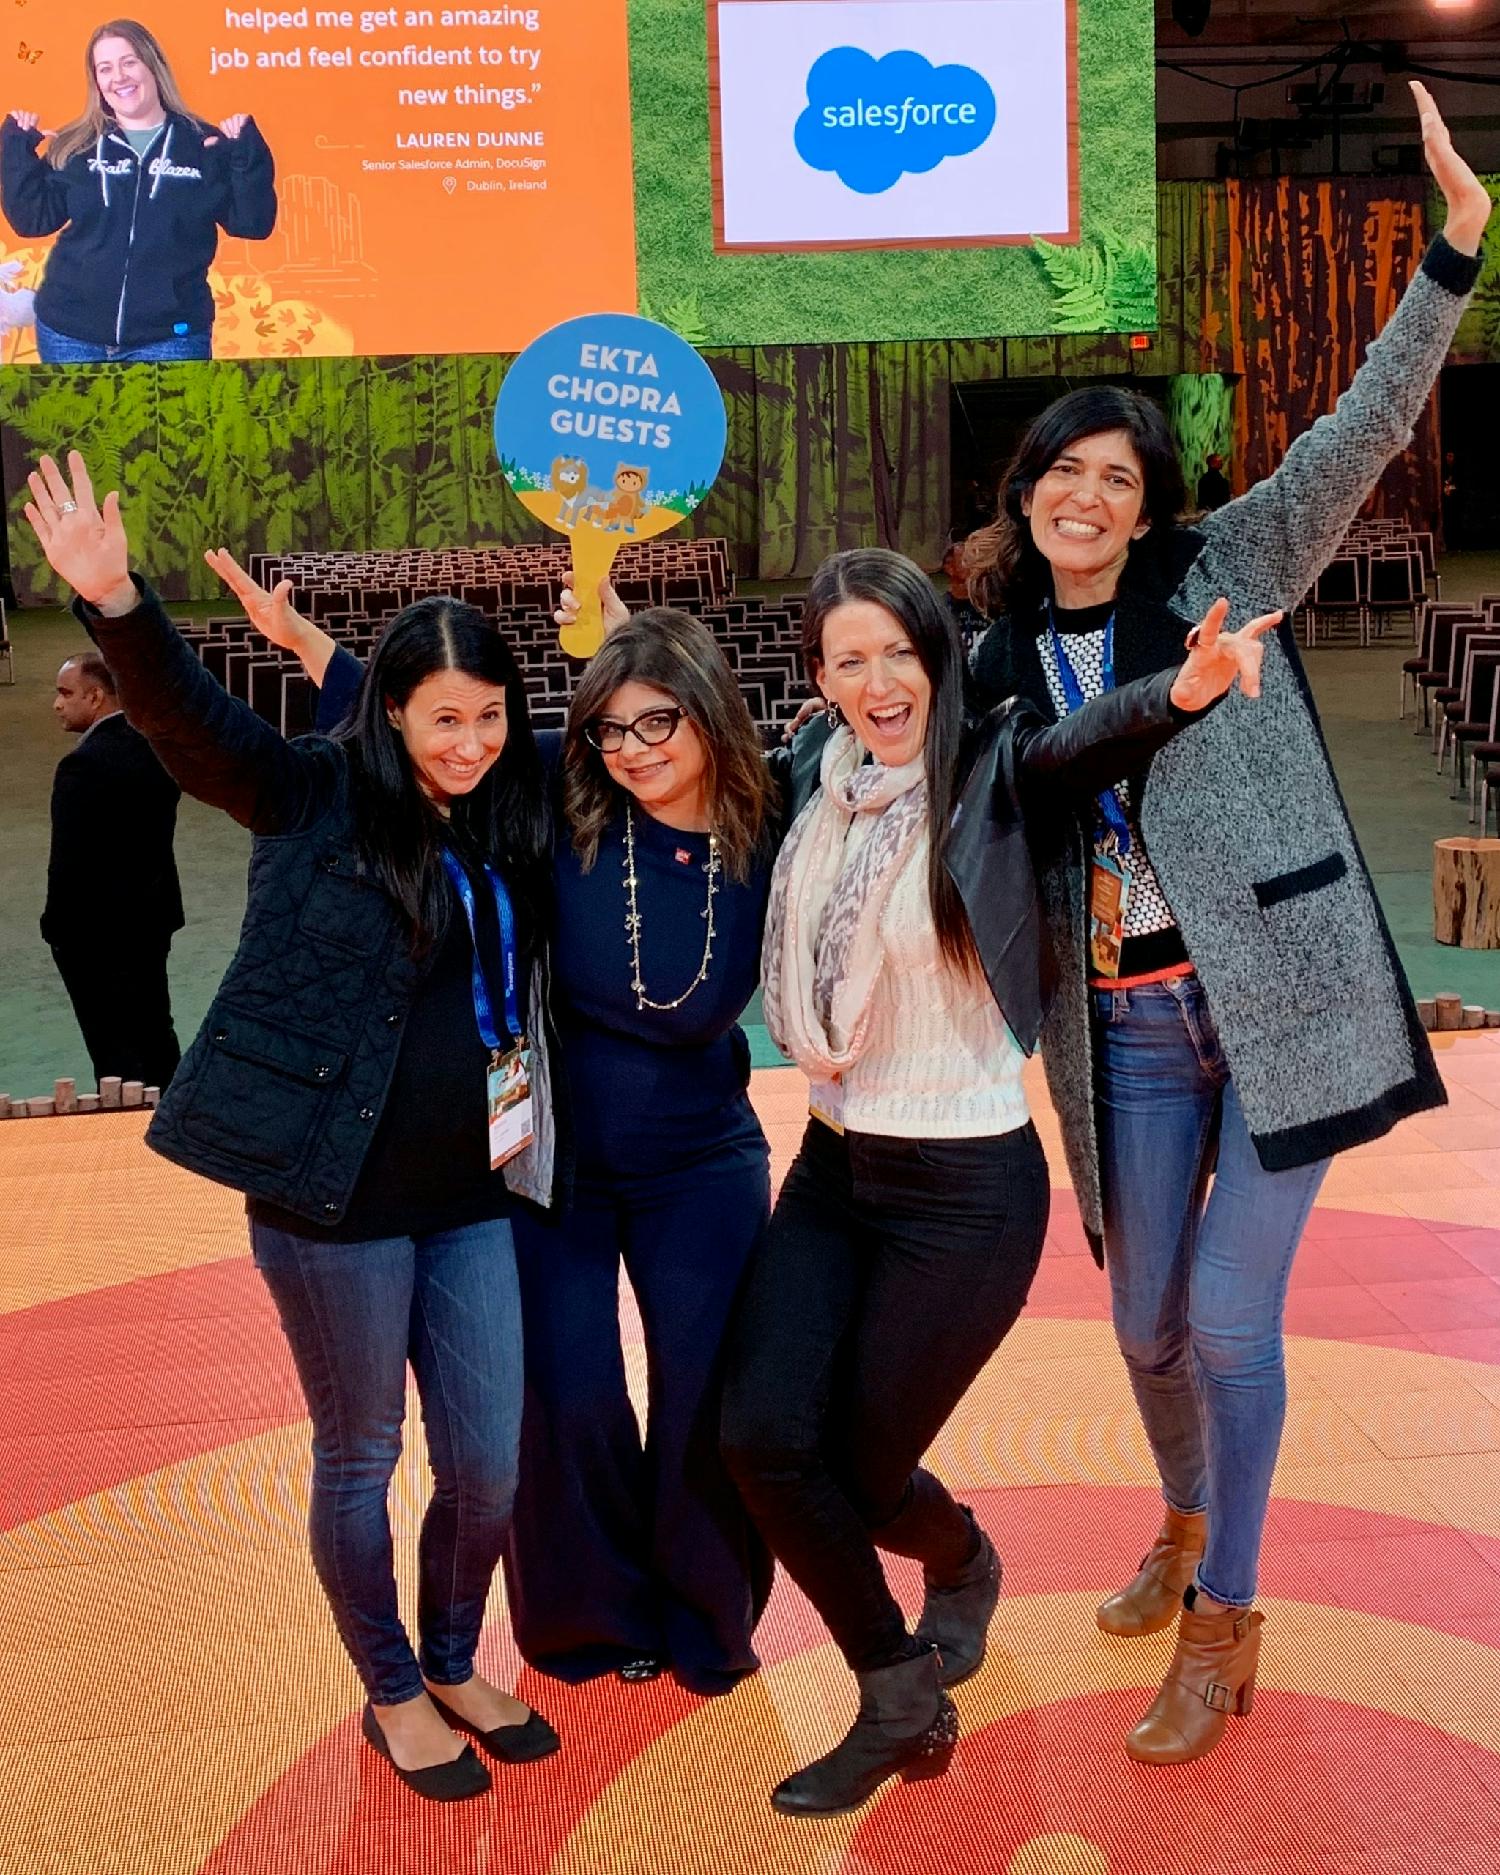 The e.l.f. Marketing team was so proud to attend the 2019 Salesforce Dreamforce event.